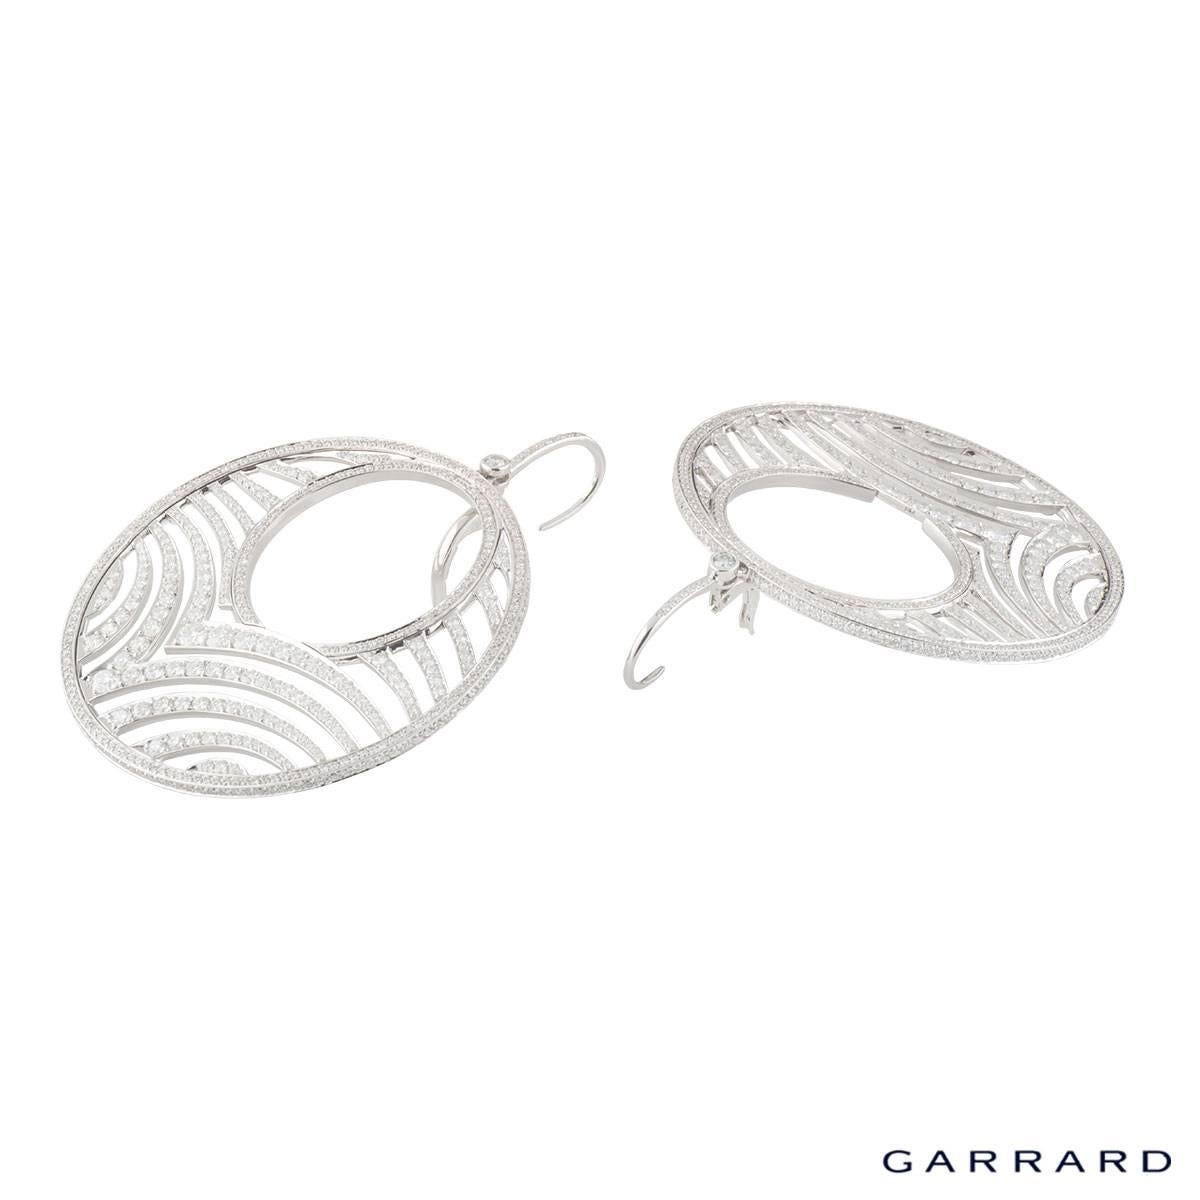 A sparkly 18k white gold Garrard diamond hoop earrings. The hoops comprise of a an open work circular motif encrusted with round brilliant cut diamonds with a weight of approximately 12.30ct, G colour and VS clarity. The earrings feature a